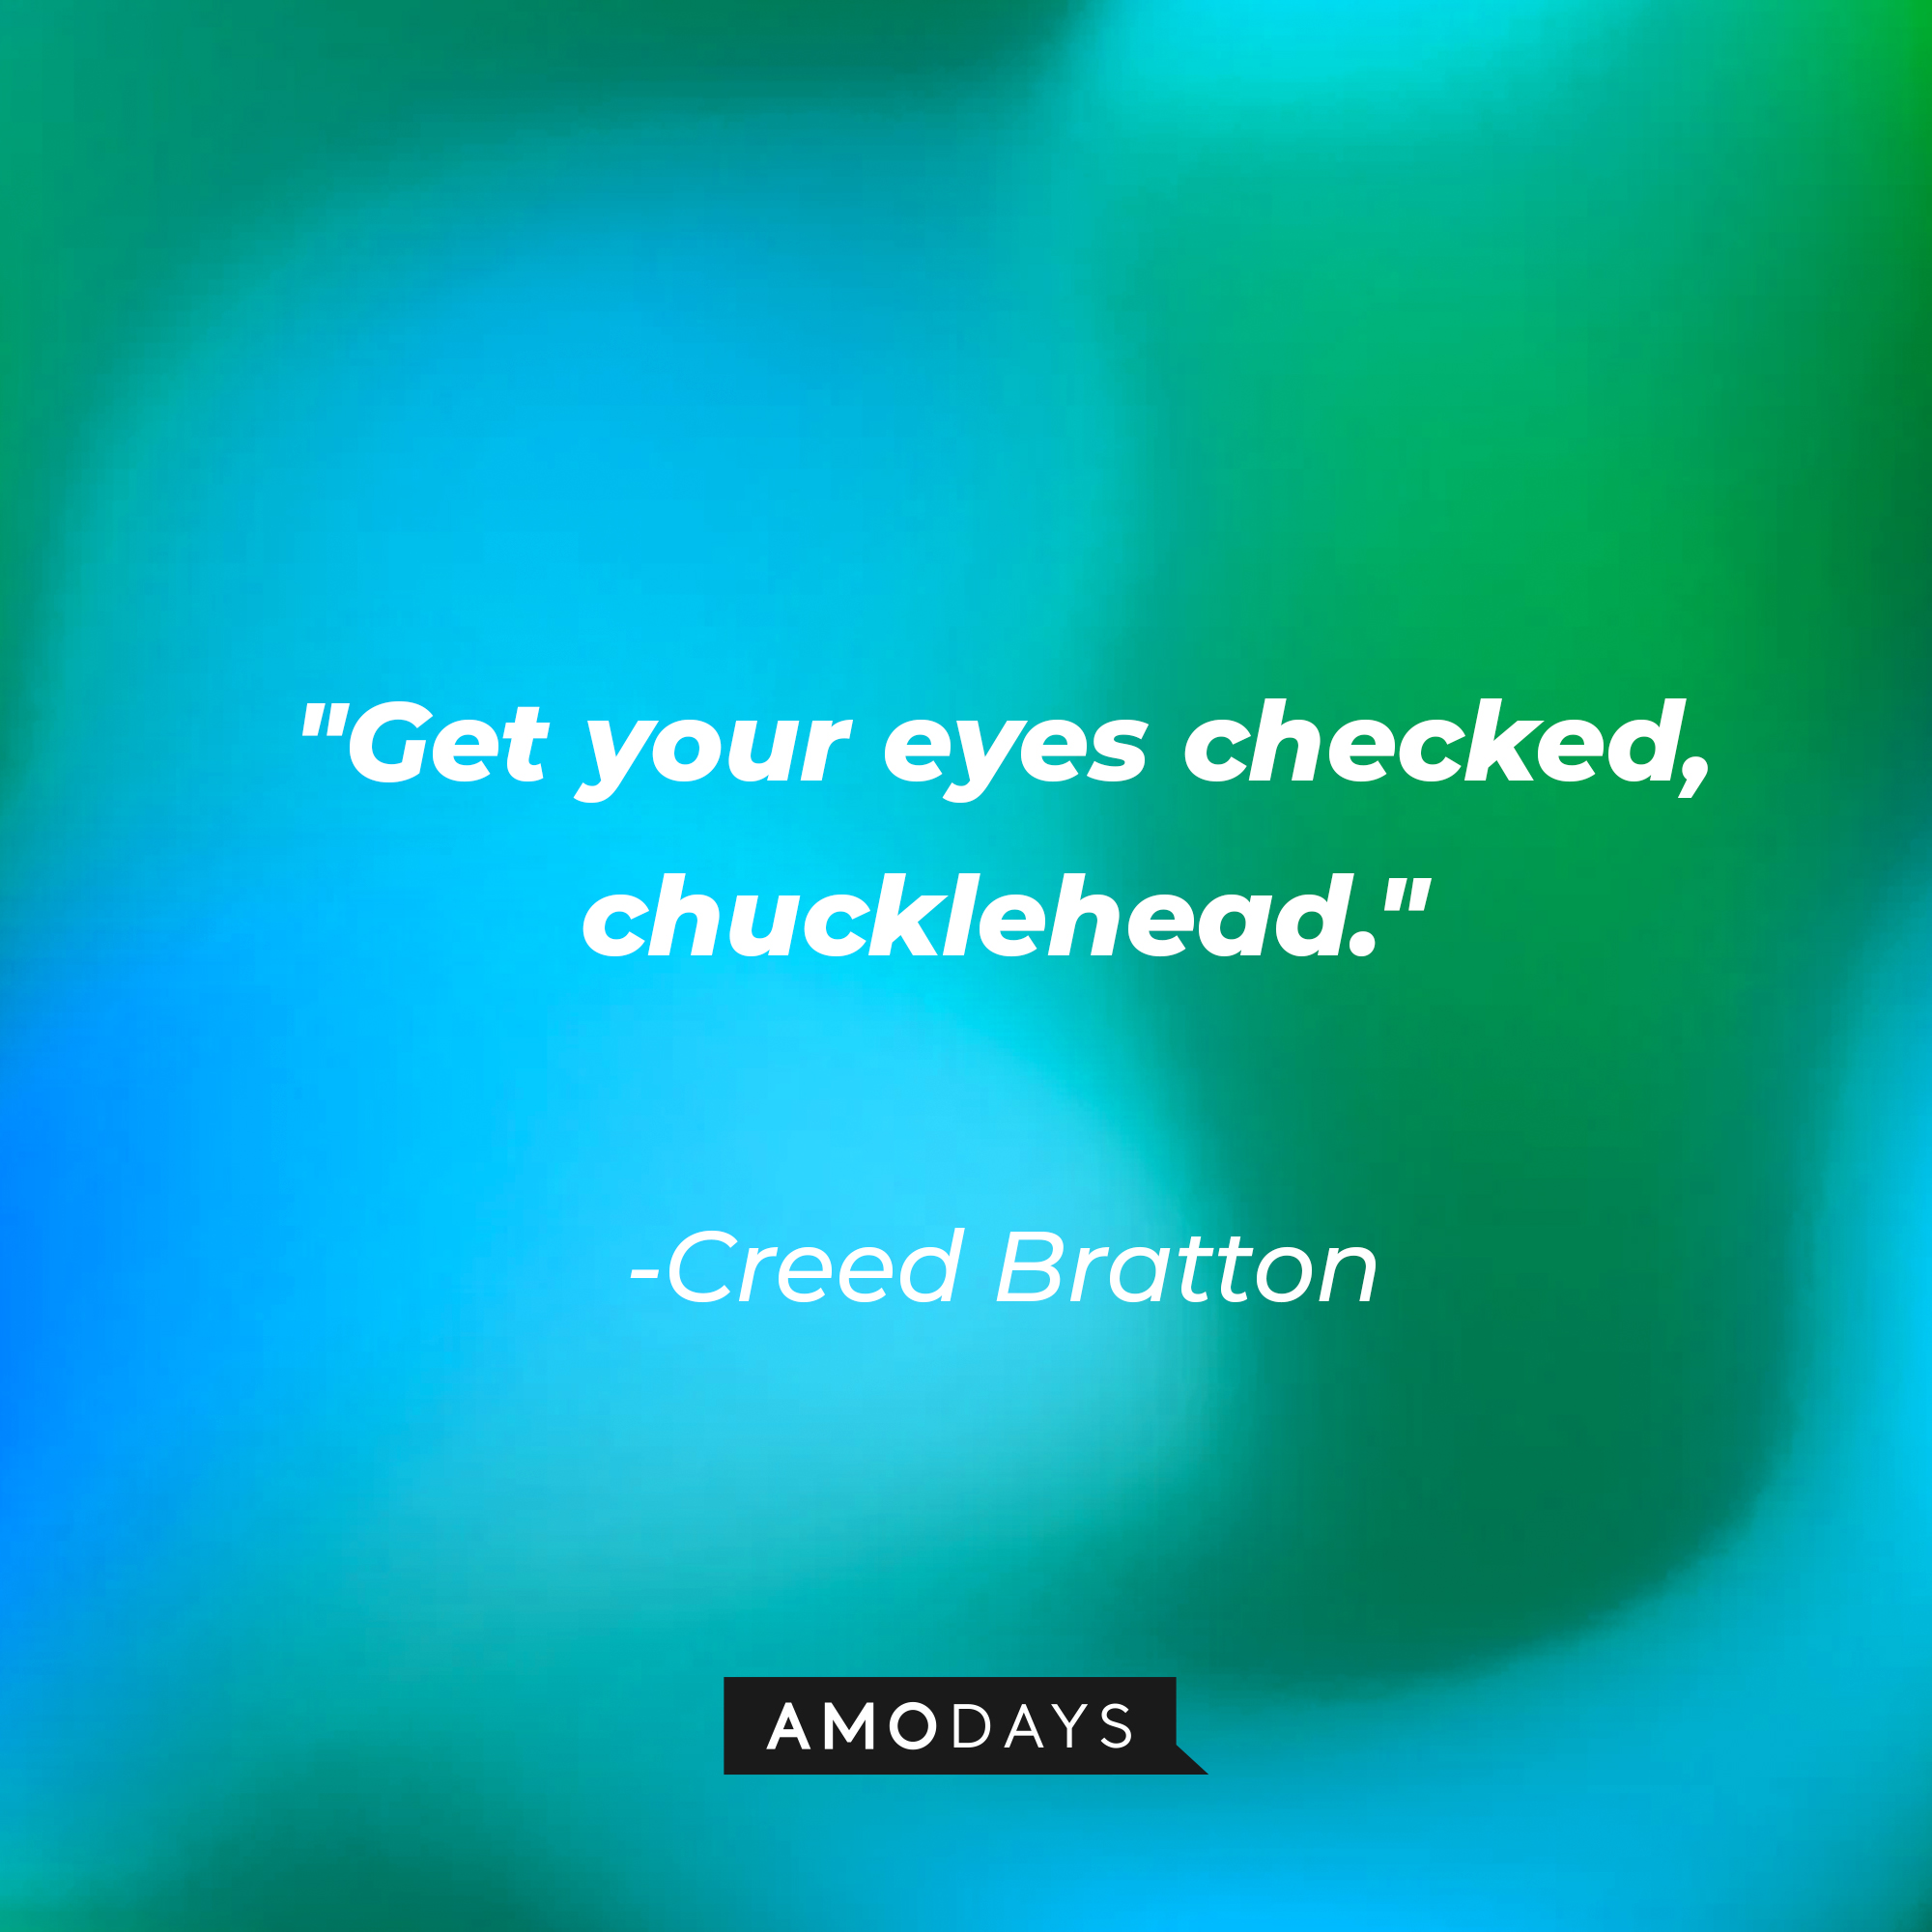 Creed Bratton's quote: "Get your eyes checked, chucklehead." | Source: AmoDays